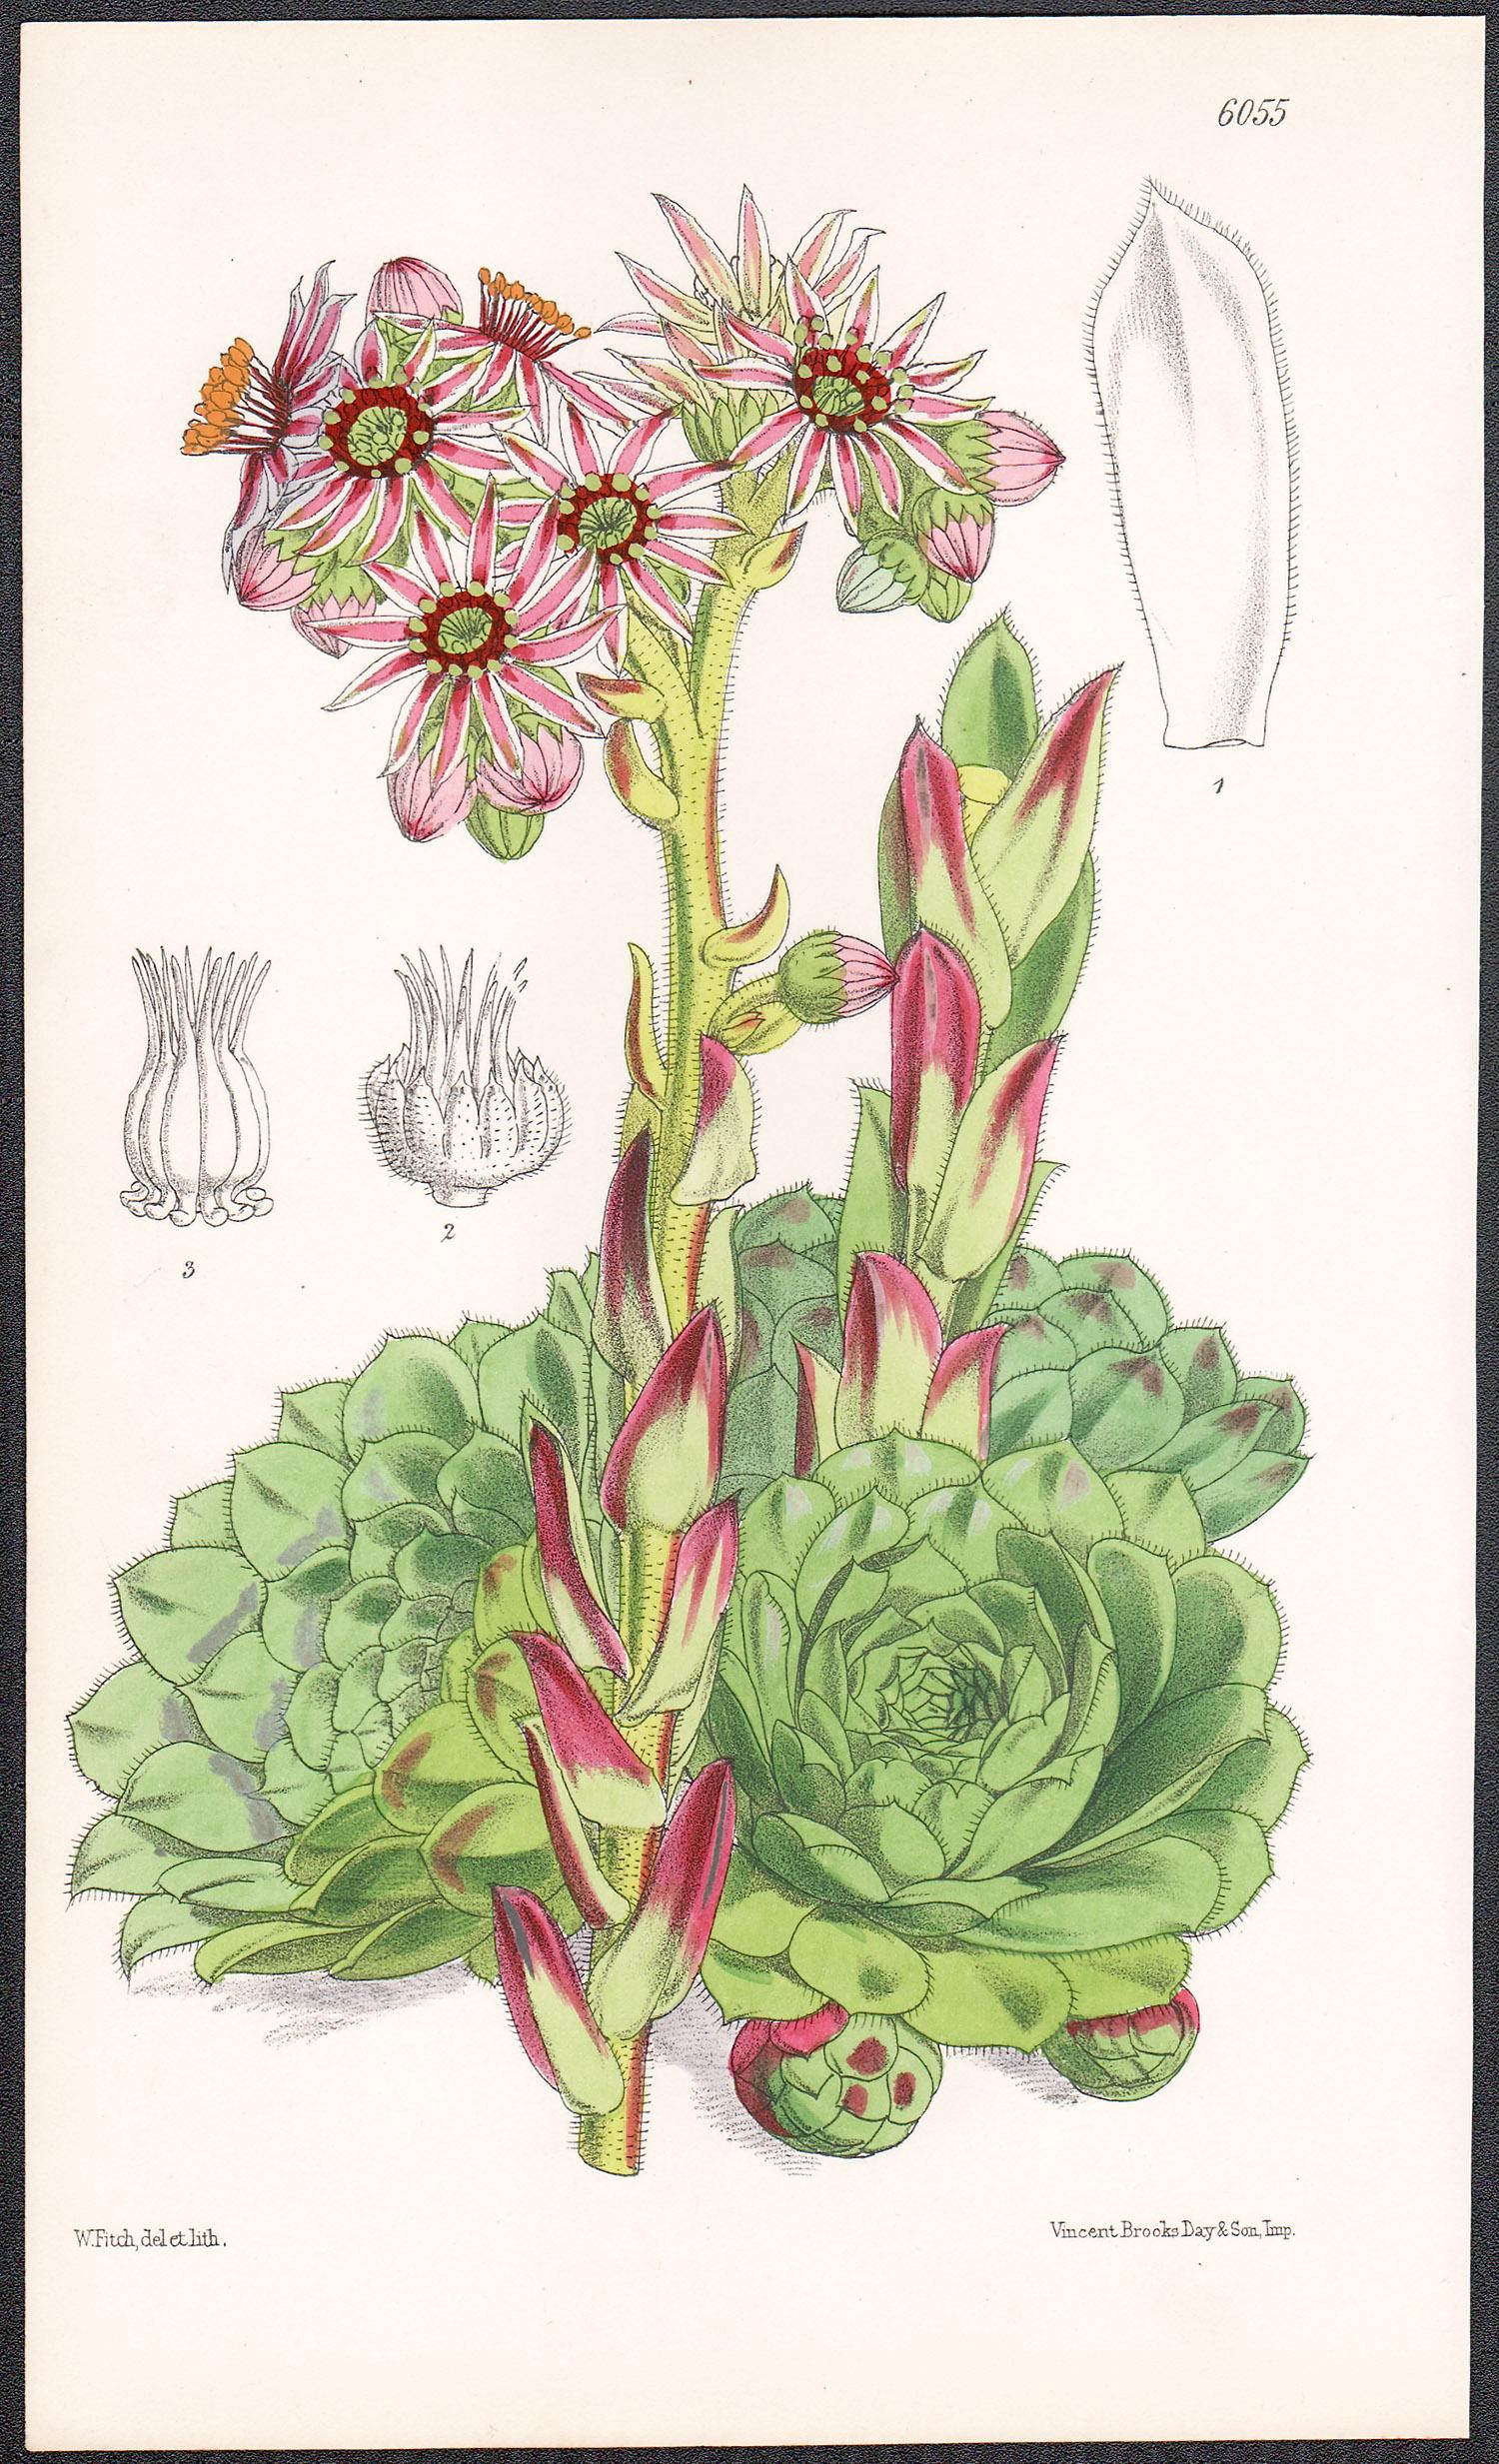 12 Botanical lithographs with original hand-colouring , 1873, by Walter Hood Fitch (1817-1892).

235mm by 145mm (sheet)

Walter Hood Fitch was a Scottish botanical artist. From Curtis's Botanical Magazine. William Curtis (1746-1799) was a trained